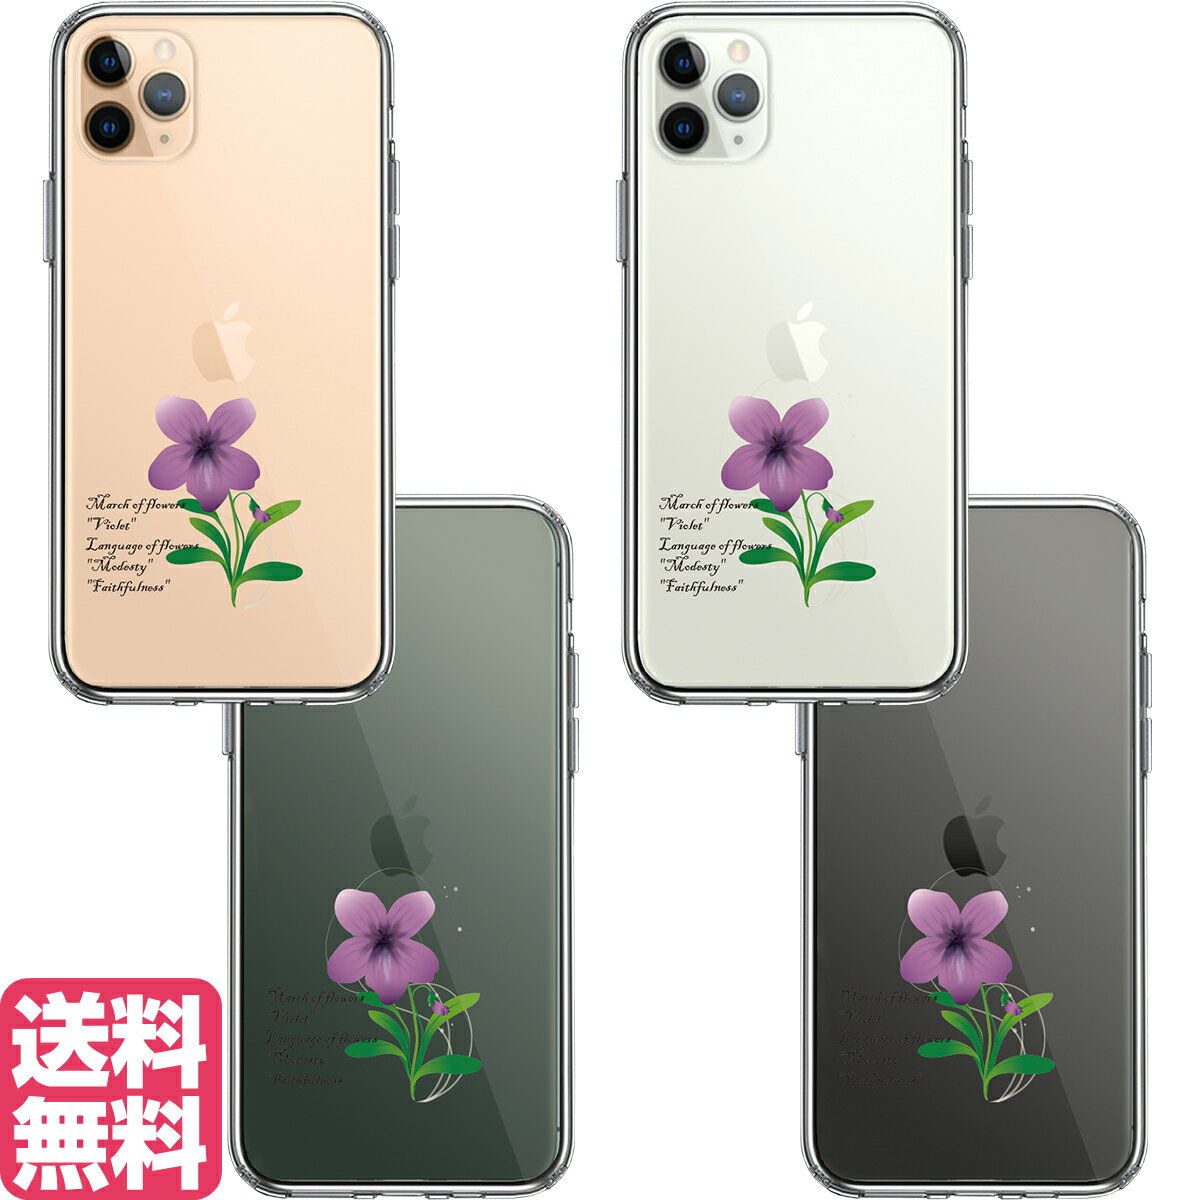 iPhone11 P[X   ԕ  ACtH11Pro a NA P[X ։ ݂ Ԍt t ͂  lC Vv  킢 iPhoneP[X happyhit